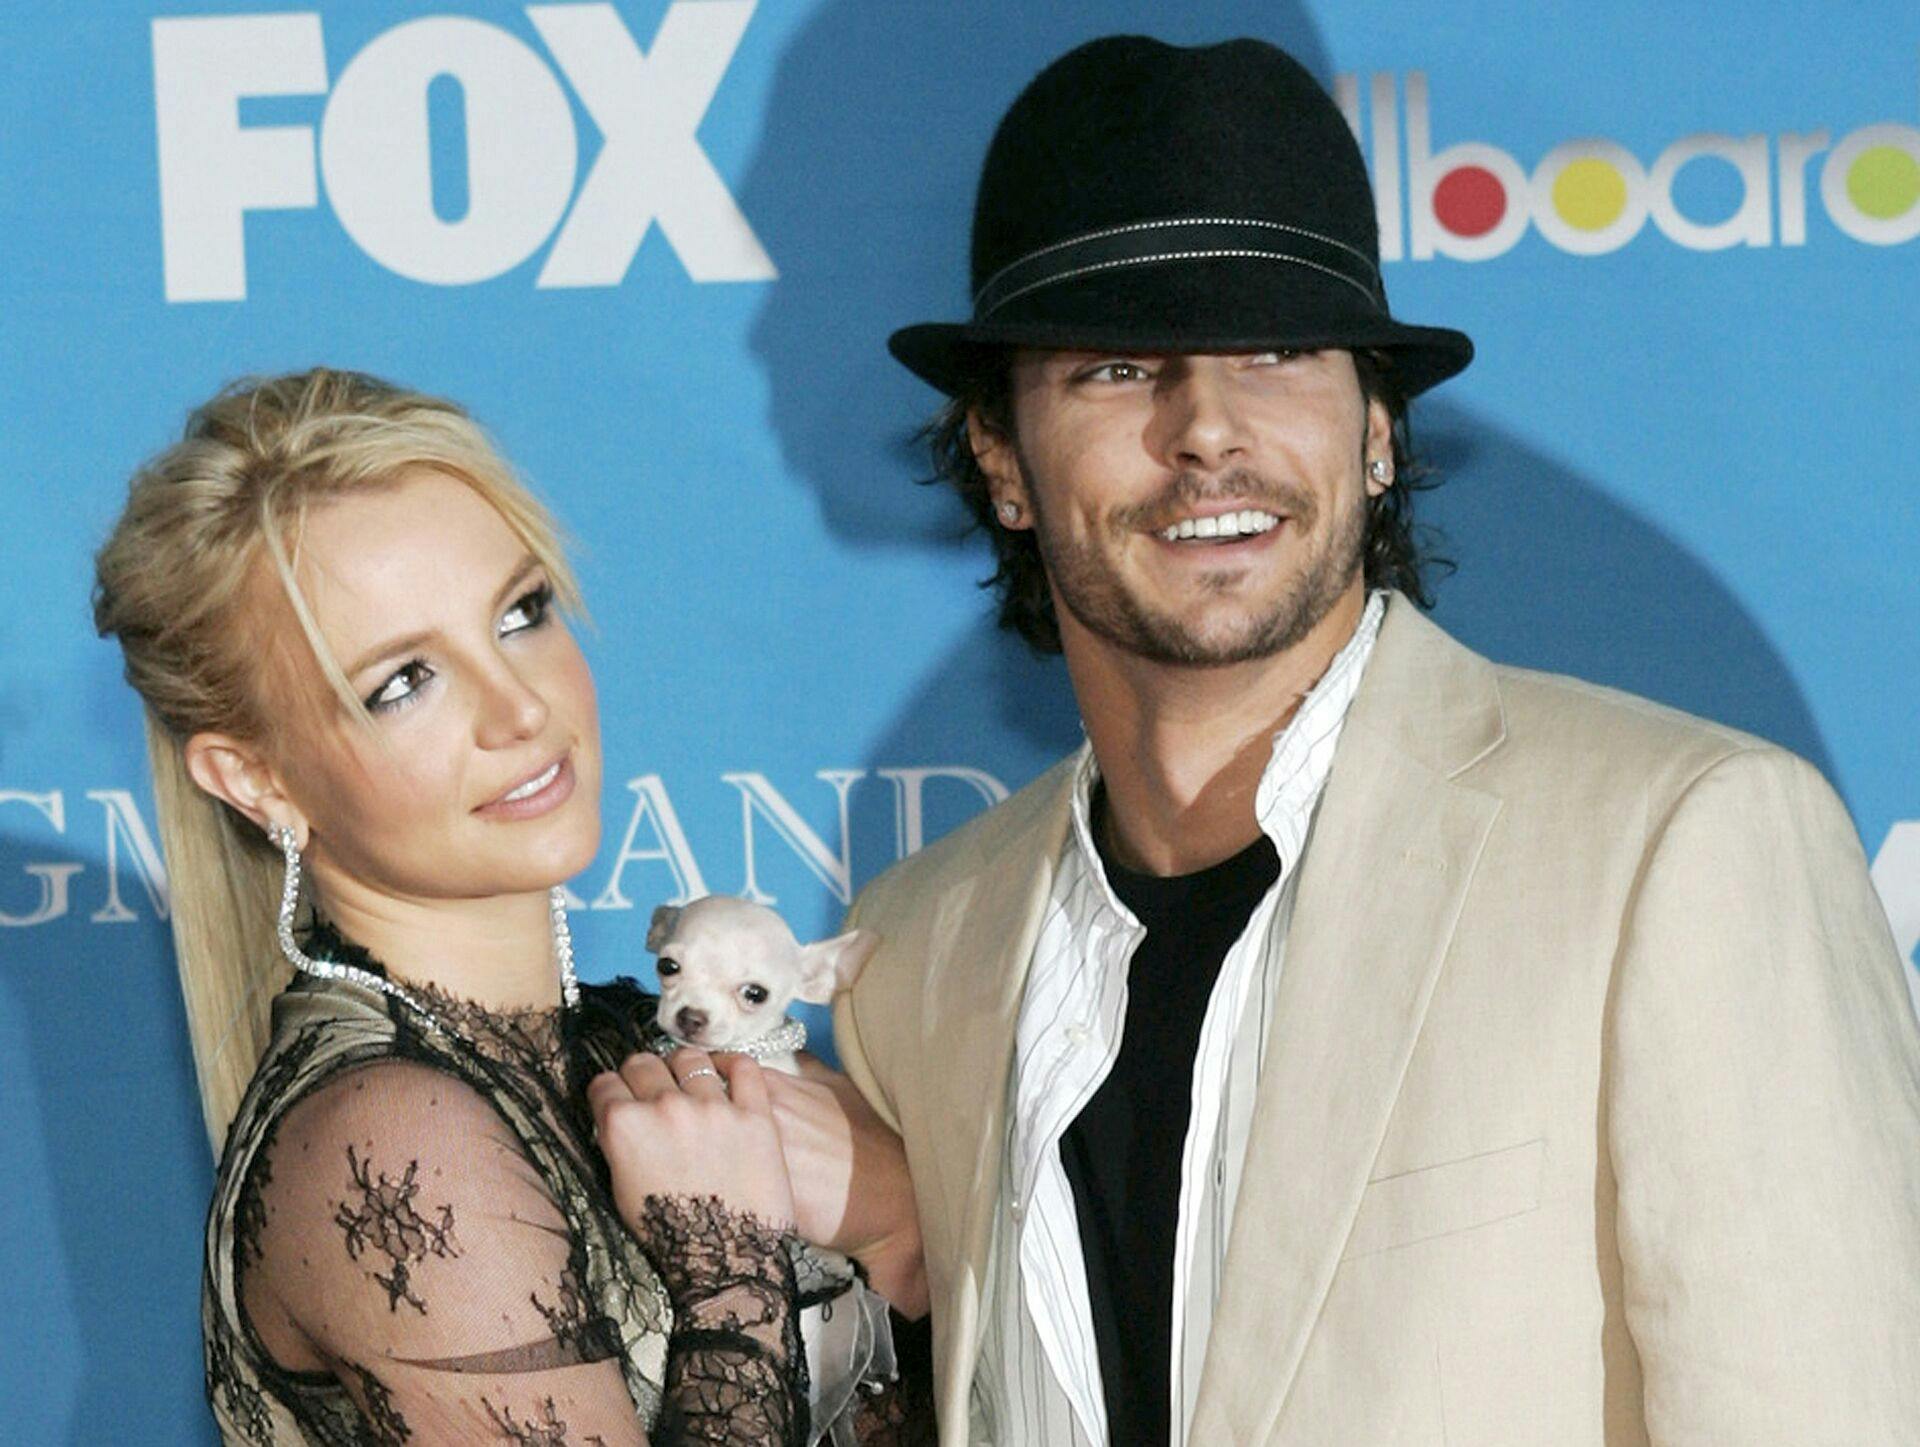 Britney Spears and Kevin Federline arrive for the 2004 